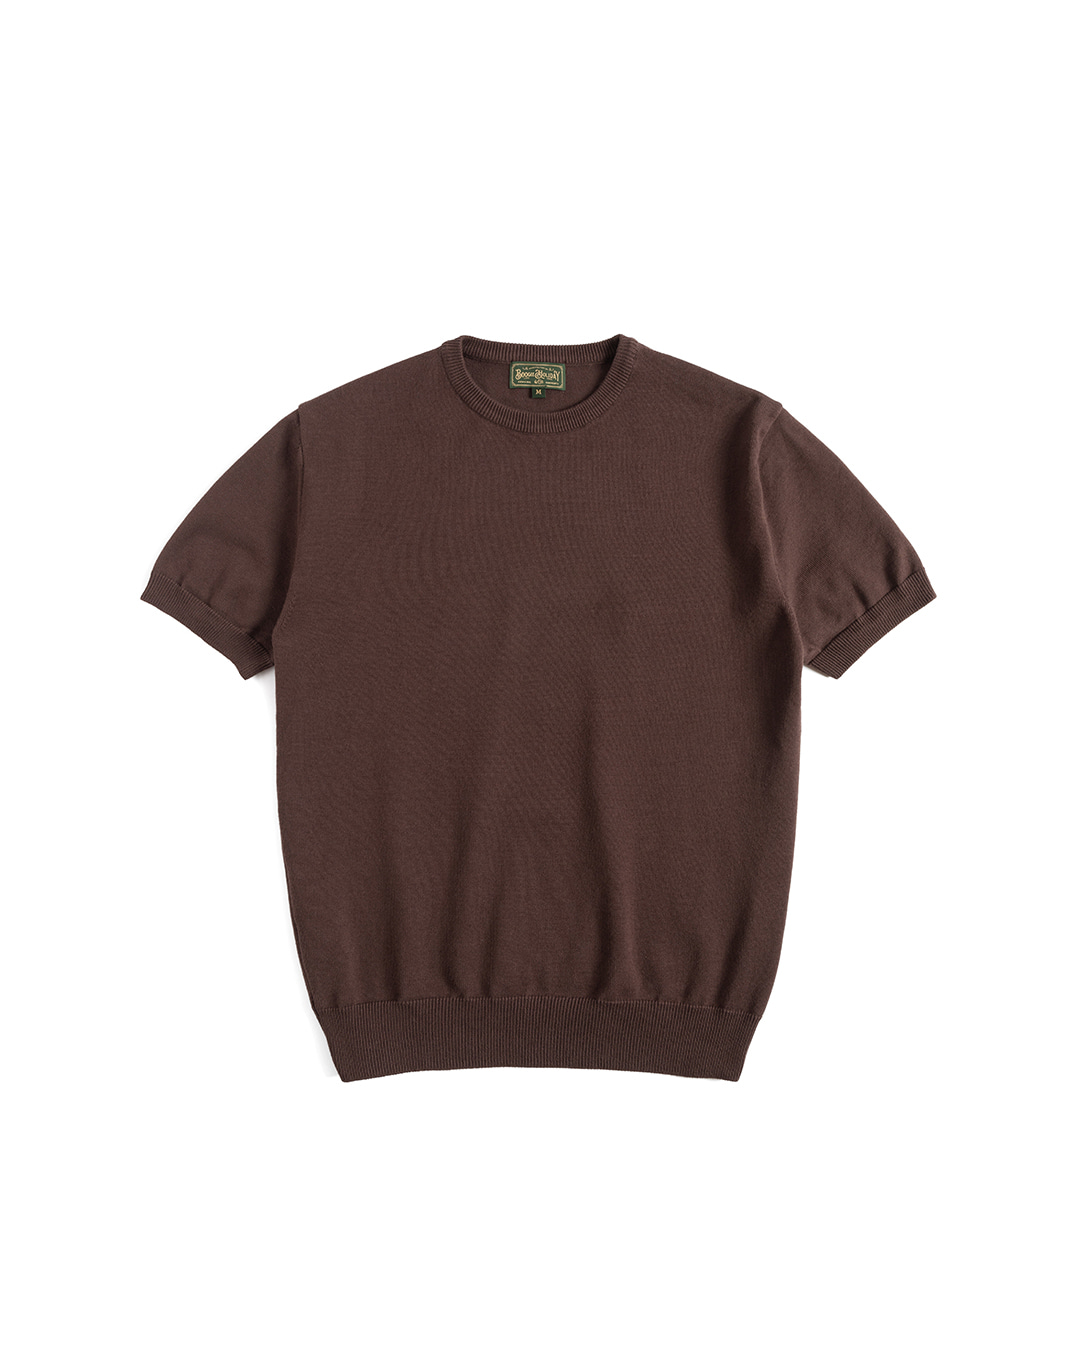 09 ESSENTIAL KNITTED T-SHIRT (brown)